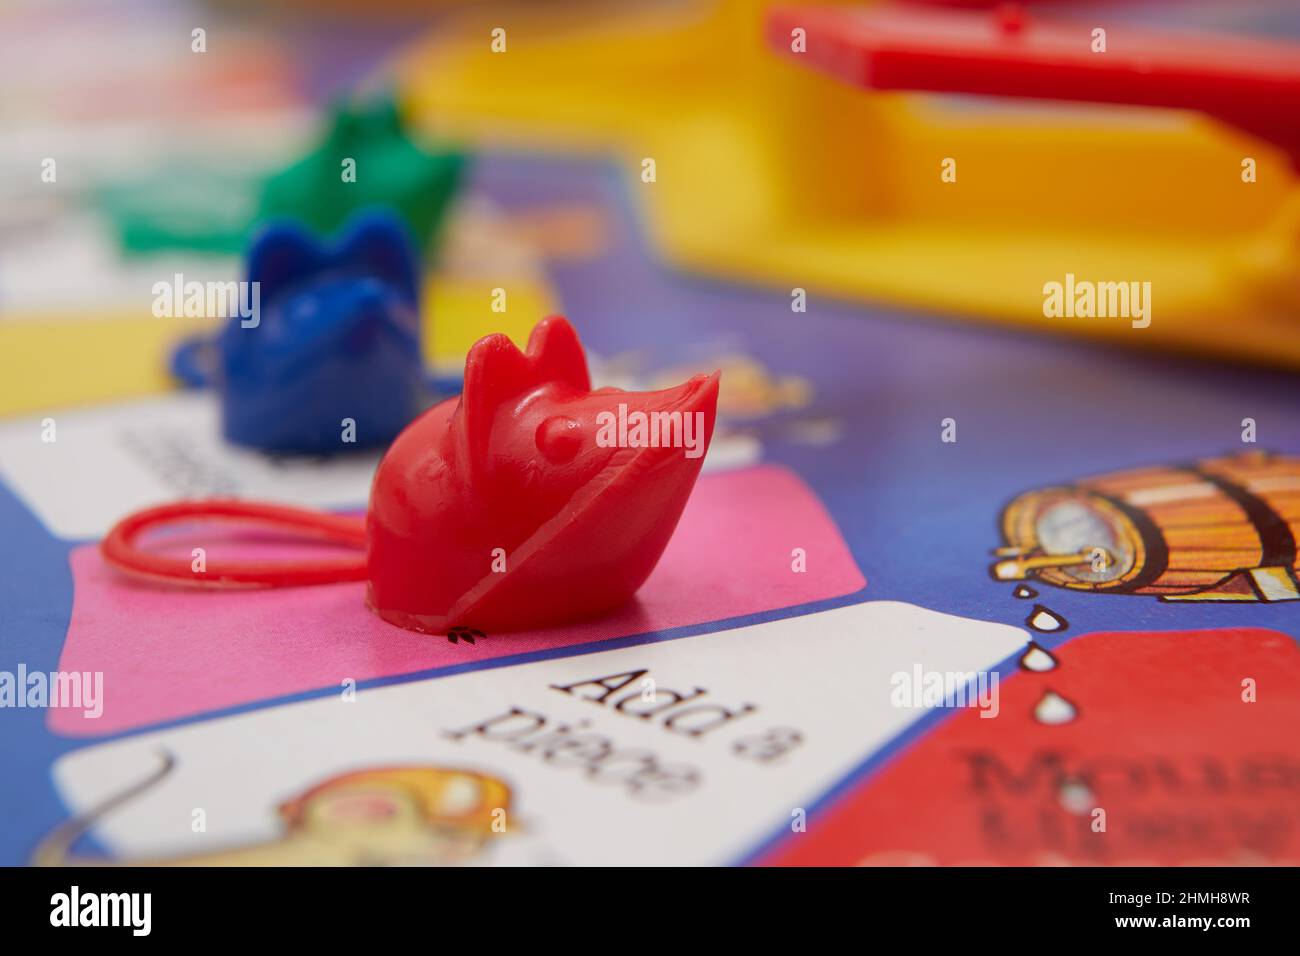 https://c8.alamy.com/comp/2HMH8WR/close-up-photograph-of-playing-pieces-on-a-mouse-trap-board-game-2HMH8WR.jpg